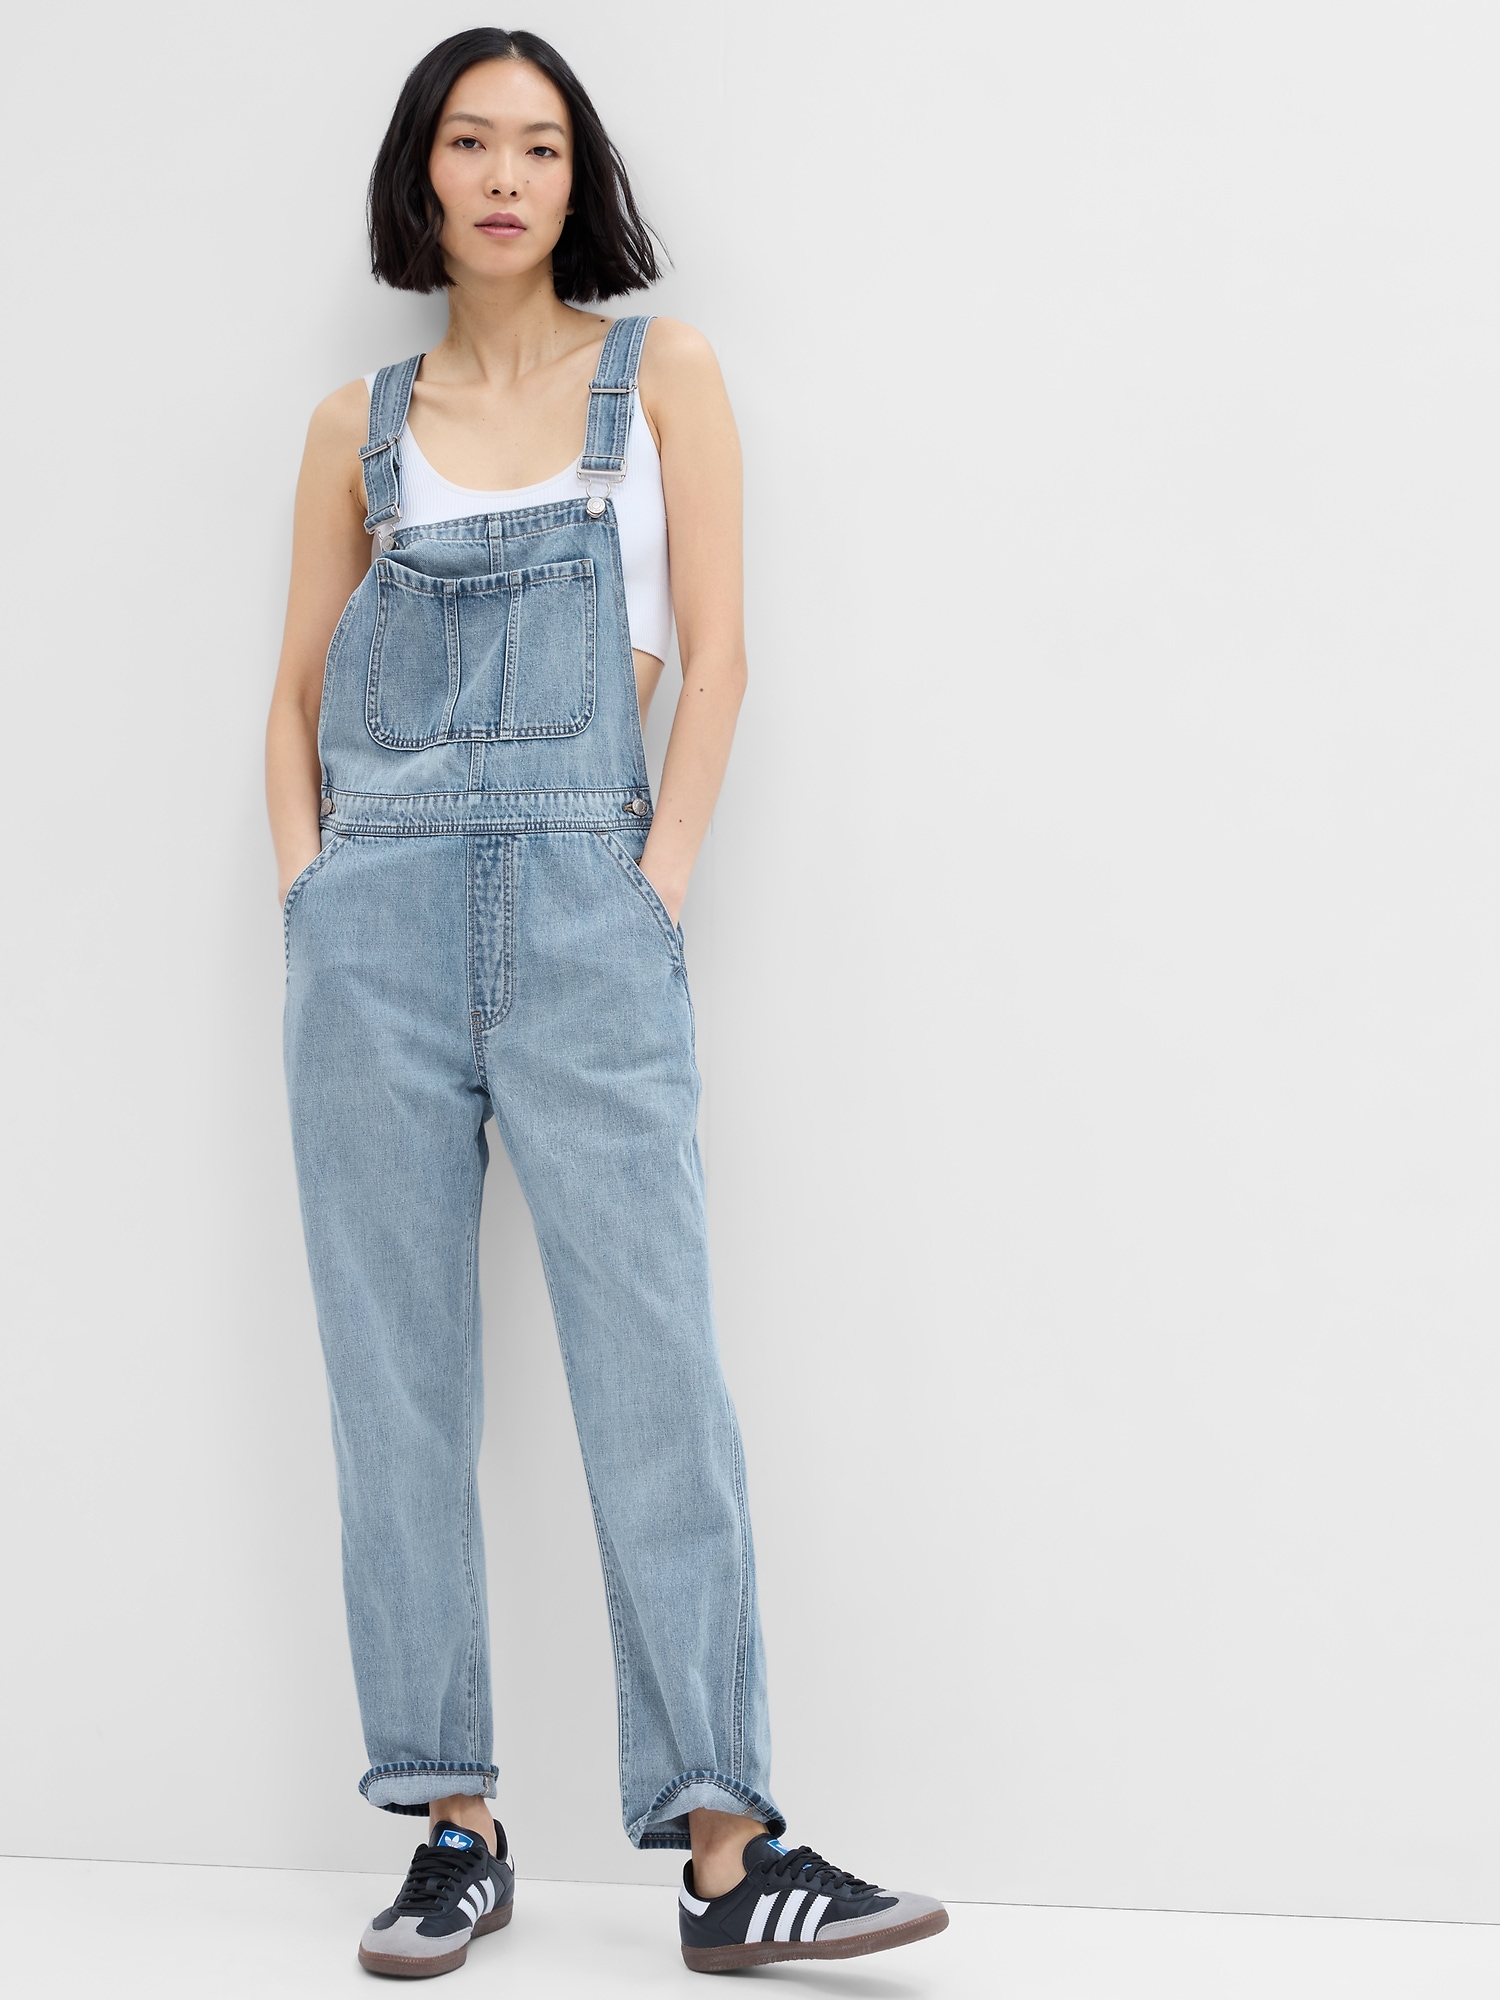 Slouchy Denim Overalls with Washwell | Gap Factory